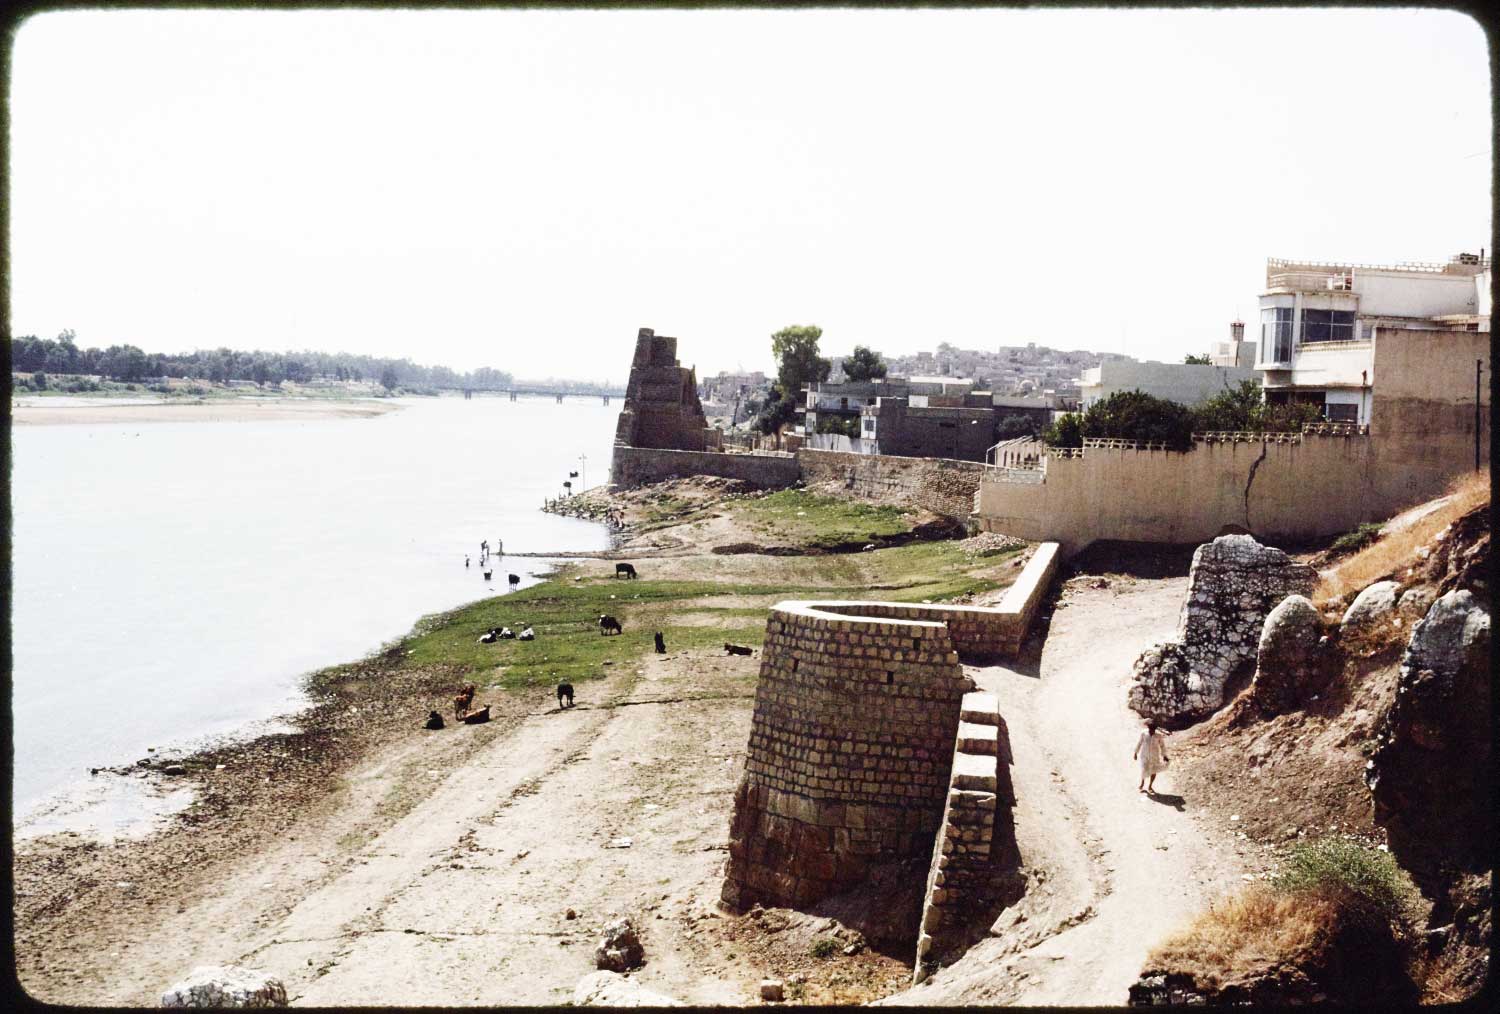 View of ramparts and Qara Sarai on Tigris from upstream looking down.